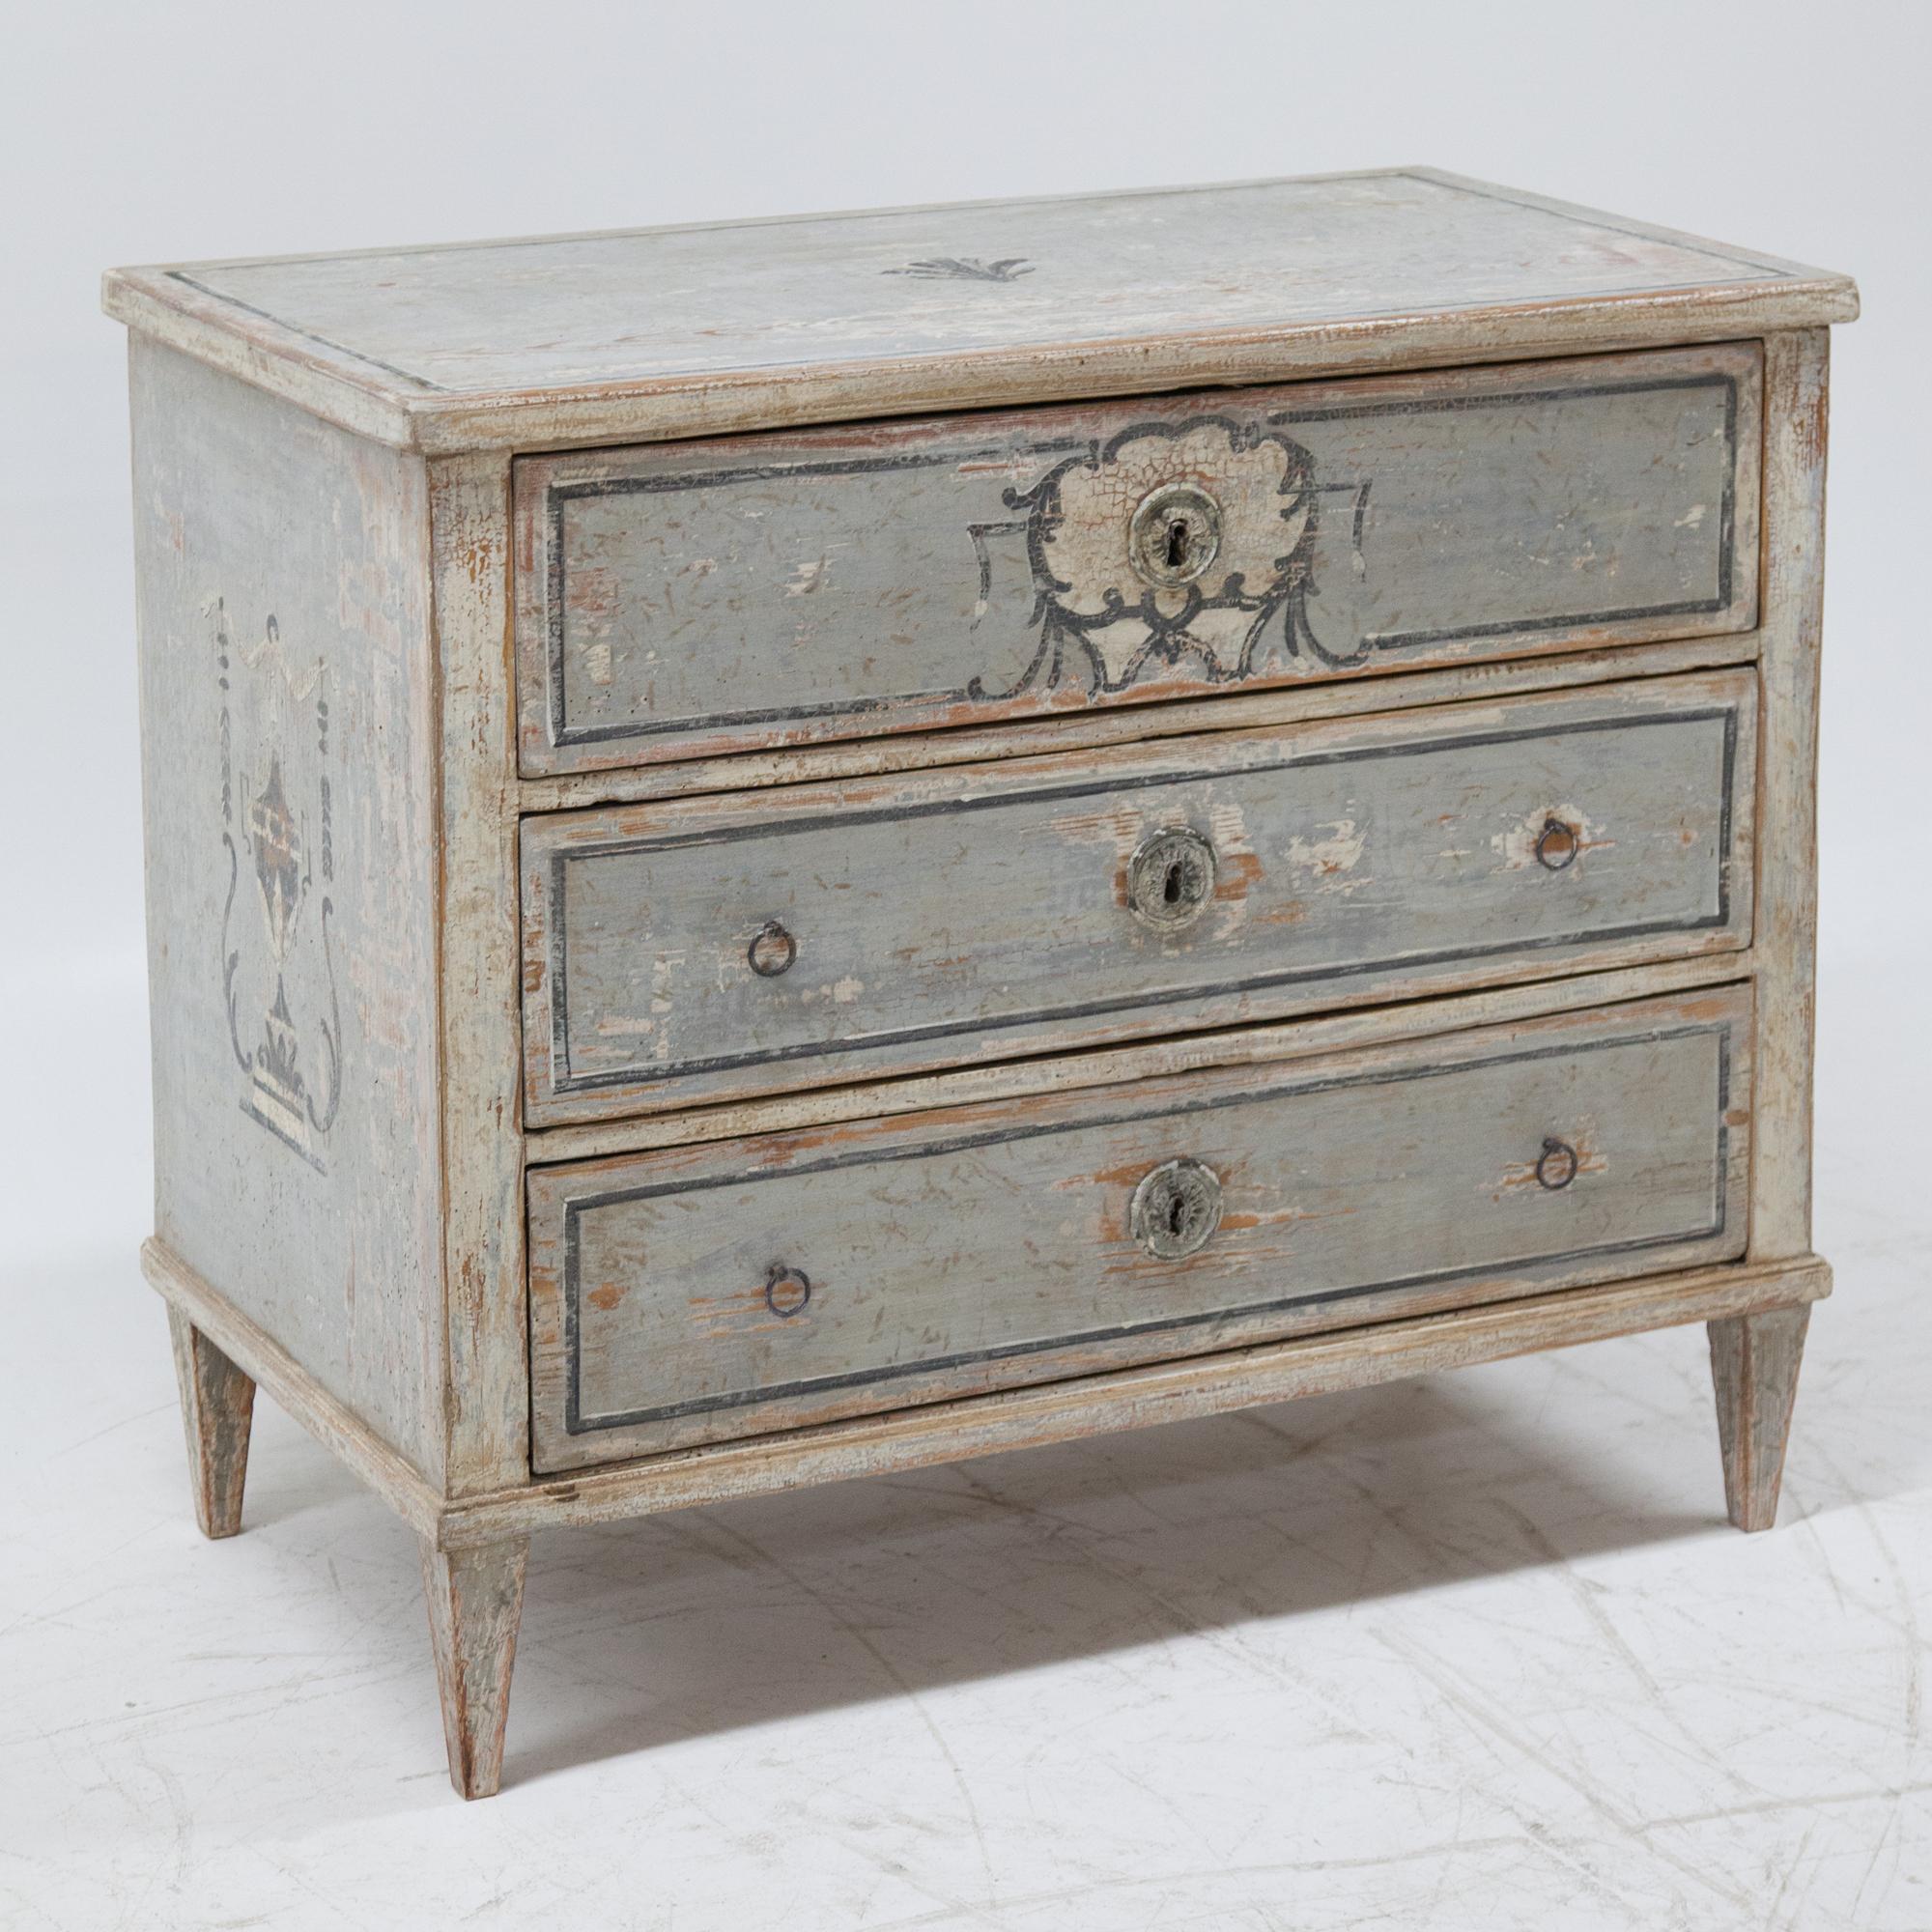 Biedermeier chest of drawers with three drawers on square pointed feet with a new, light blue paint with dark blue accents and a distressed patina.